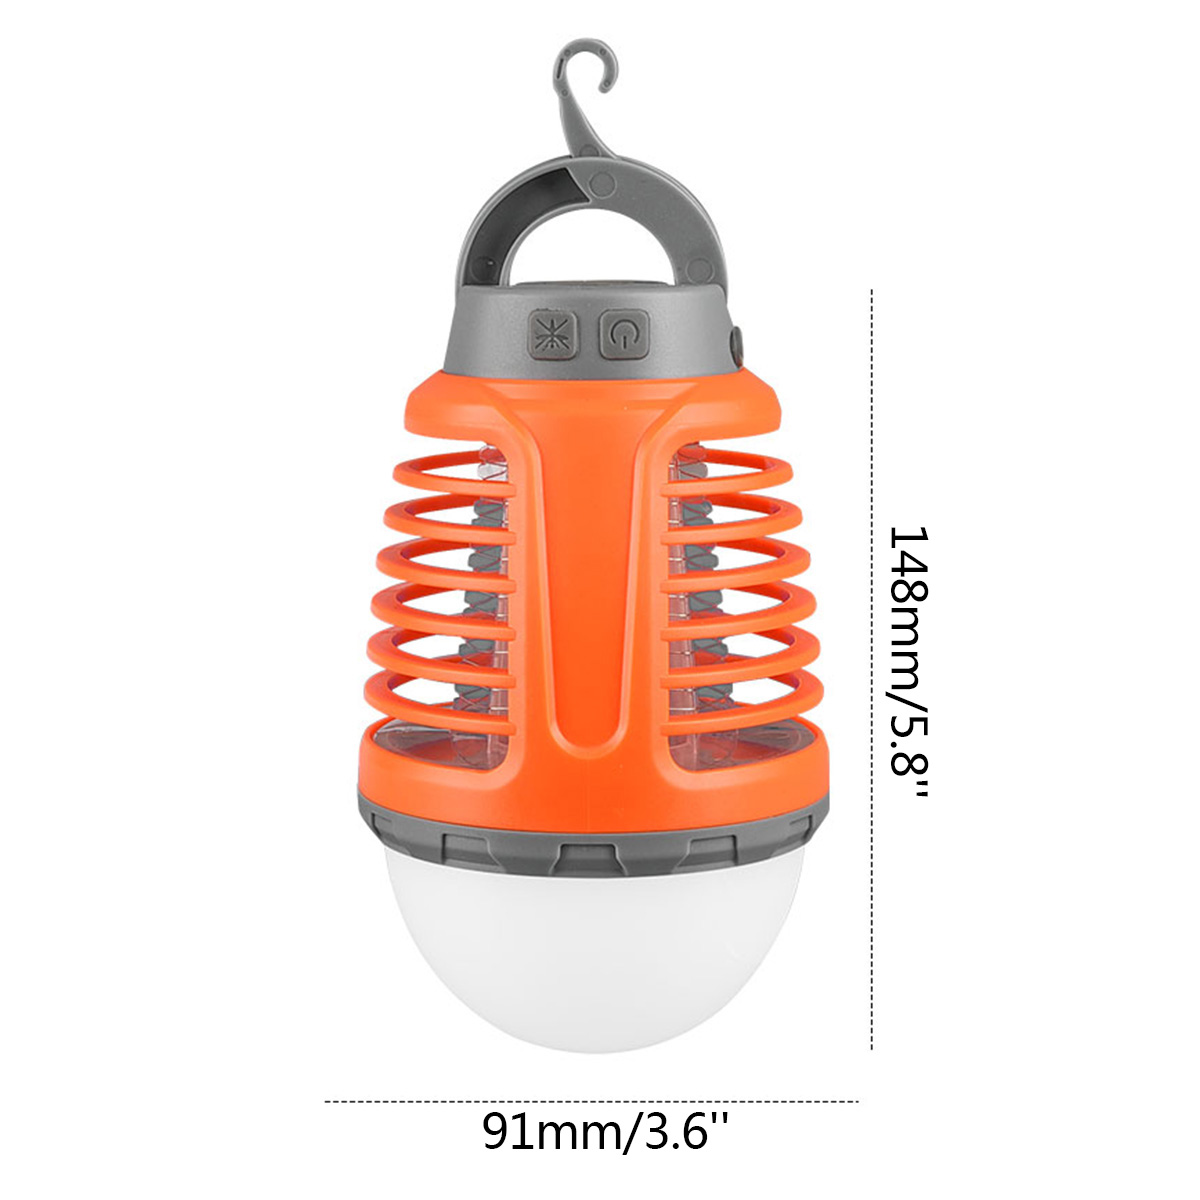 70-Lumens-2-in-1-LED-Zapper-Light-Bulbs-Mosquito-Killer-Lamp-4-Modes-USB-Rechargeable-Hook-Hanging-C-1727489-2